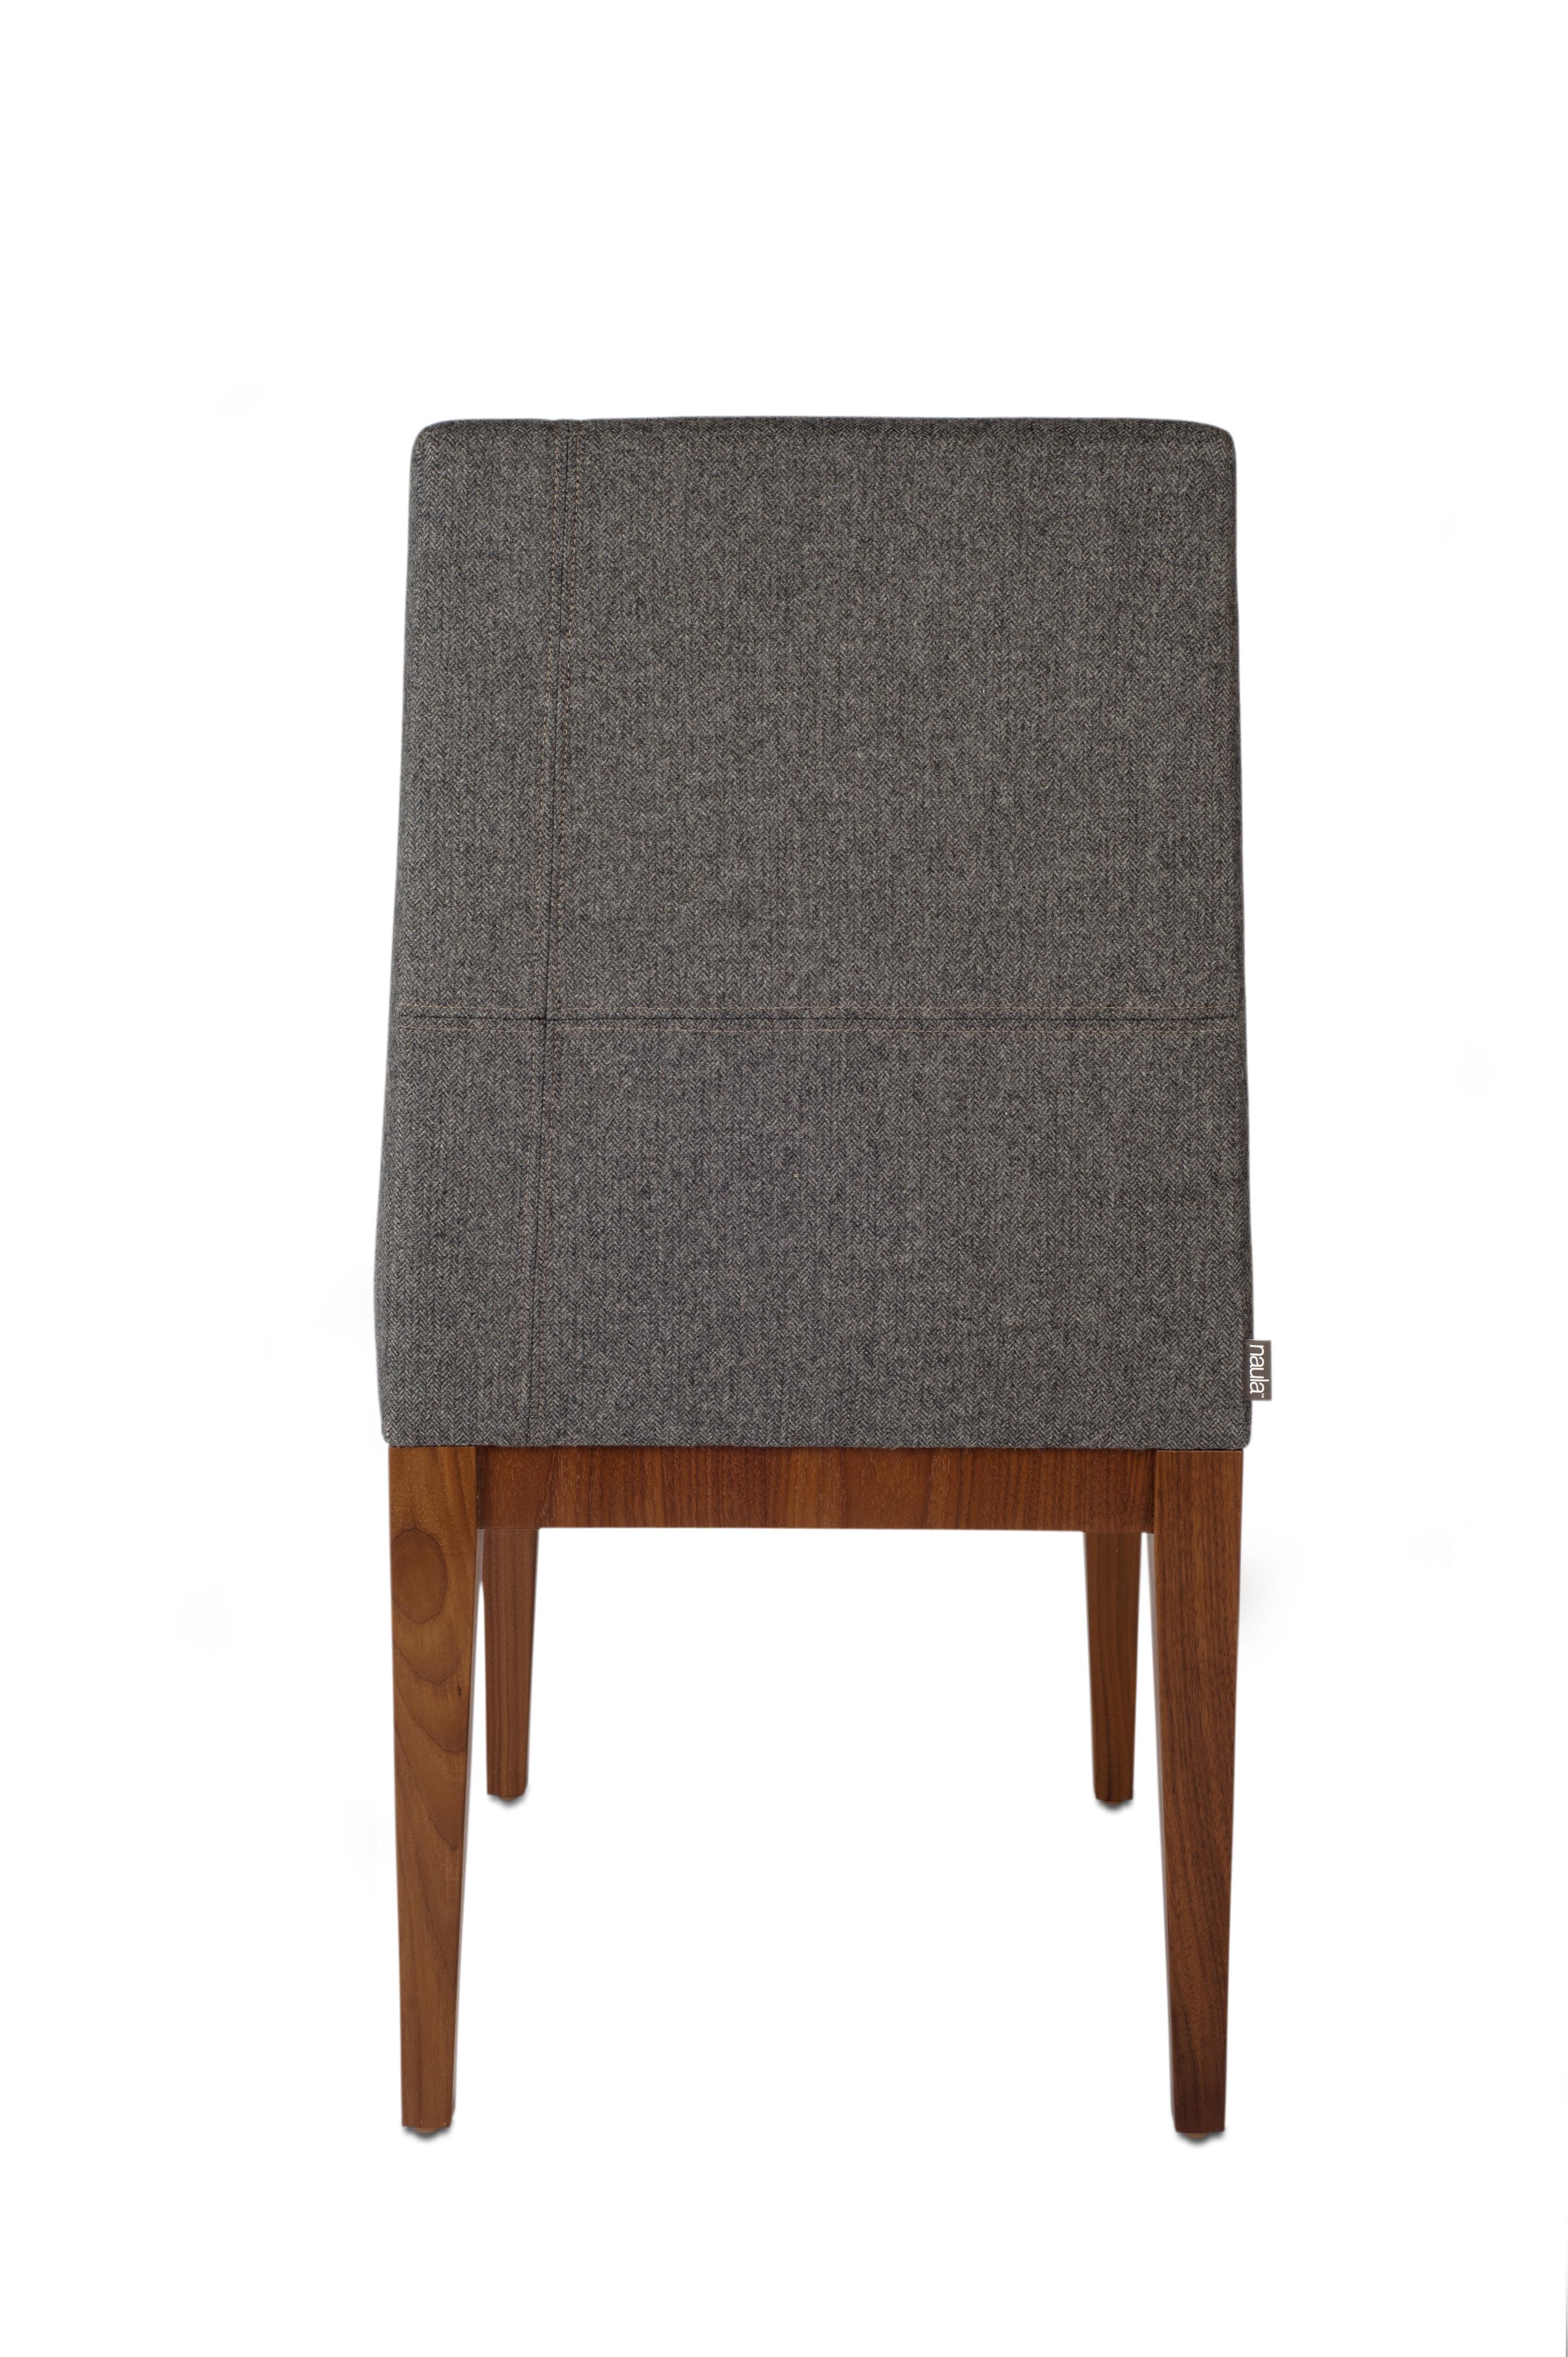 A sleek and modern combination of upholstery and wood, this dining chair is balanced and minimal. Subtle, offset hand-stitching breaks the monotony of the fabric and finishes off a look that sits well at any table.